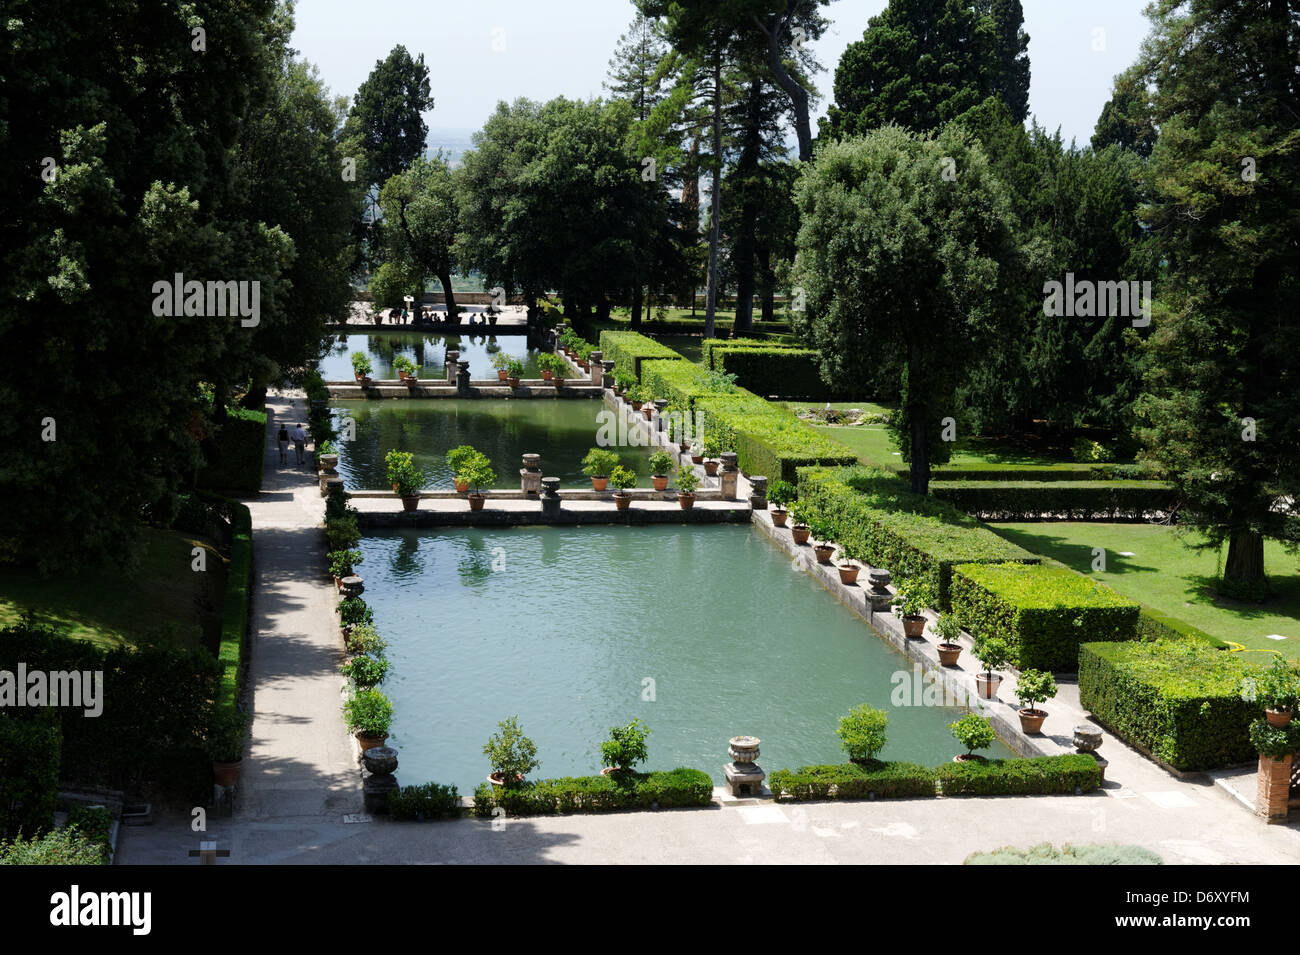 Villa d’Este. Tivoli. Italy. View of the magnificent landscaped and lush level gardens and fishponds at the Villa d Este in Tivo Stock Photo